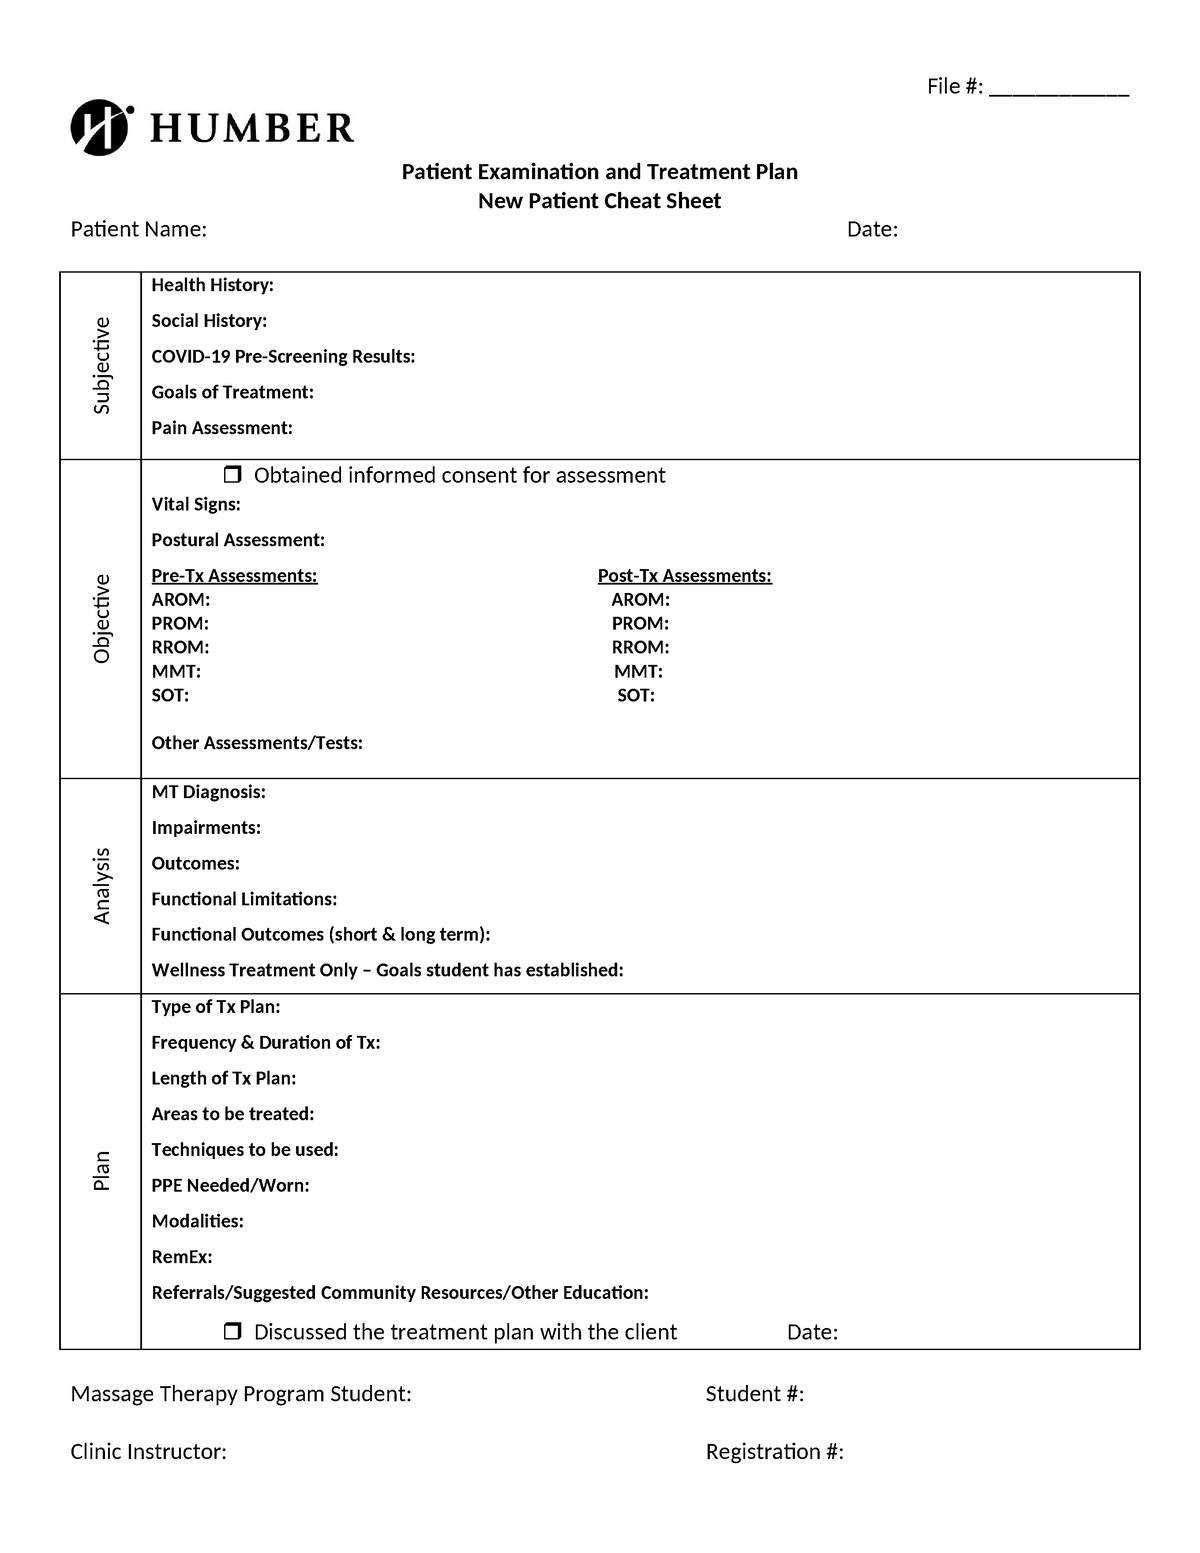 Soap Note Cheat Sheet File Patient Examination And Treatment Plan New Patient 8122